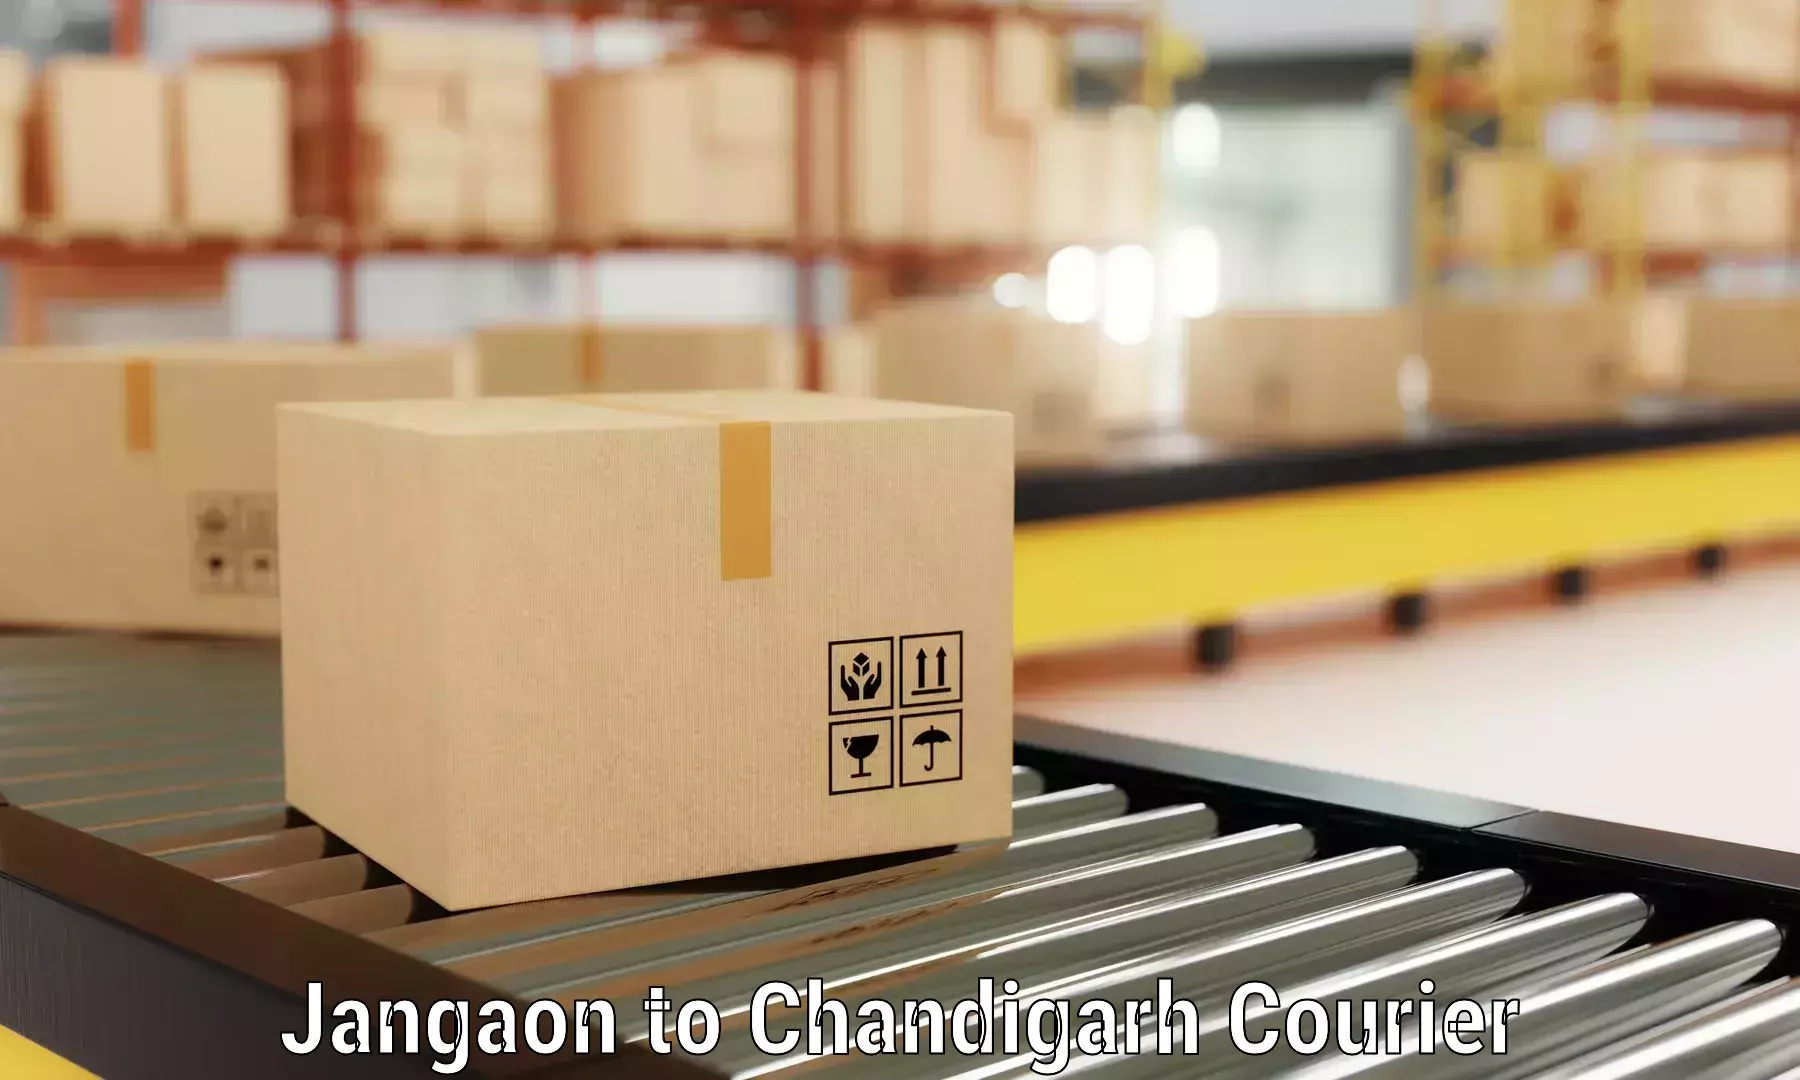 Furniture delivery service Jangaon to Chandigarh